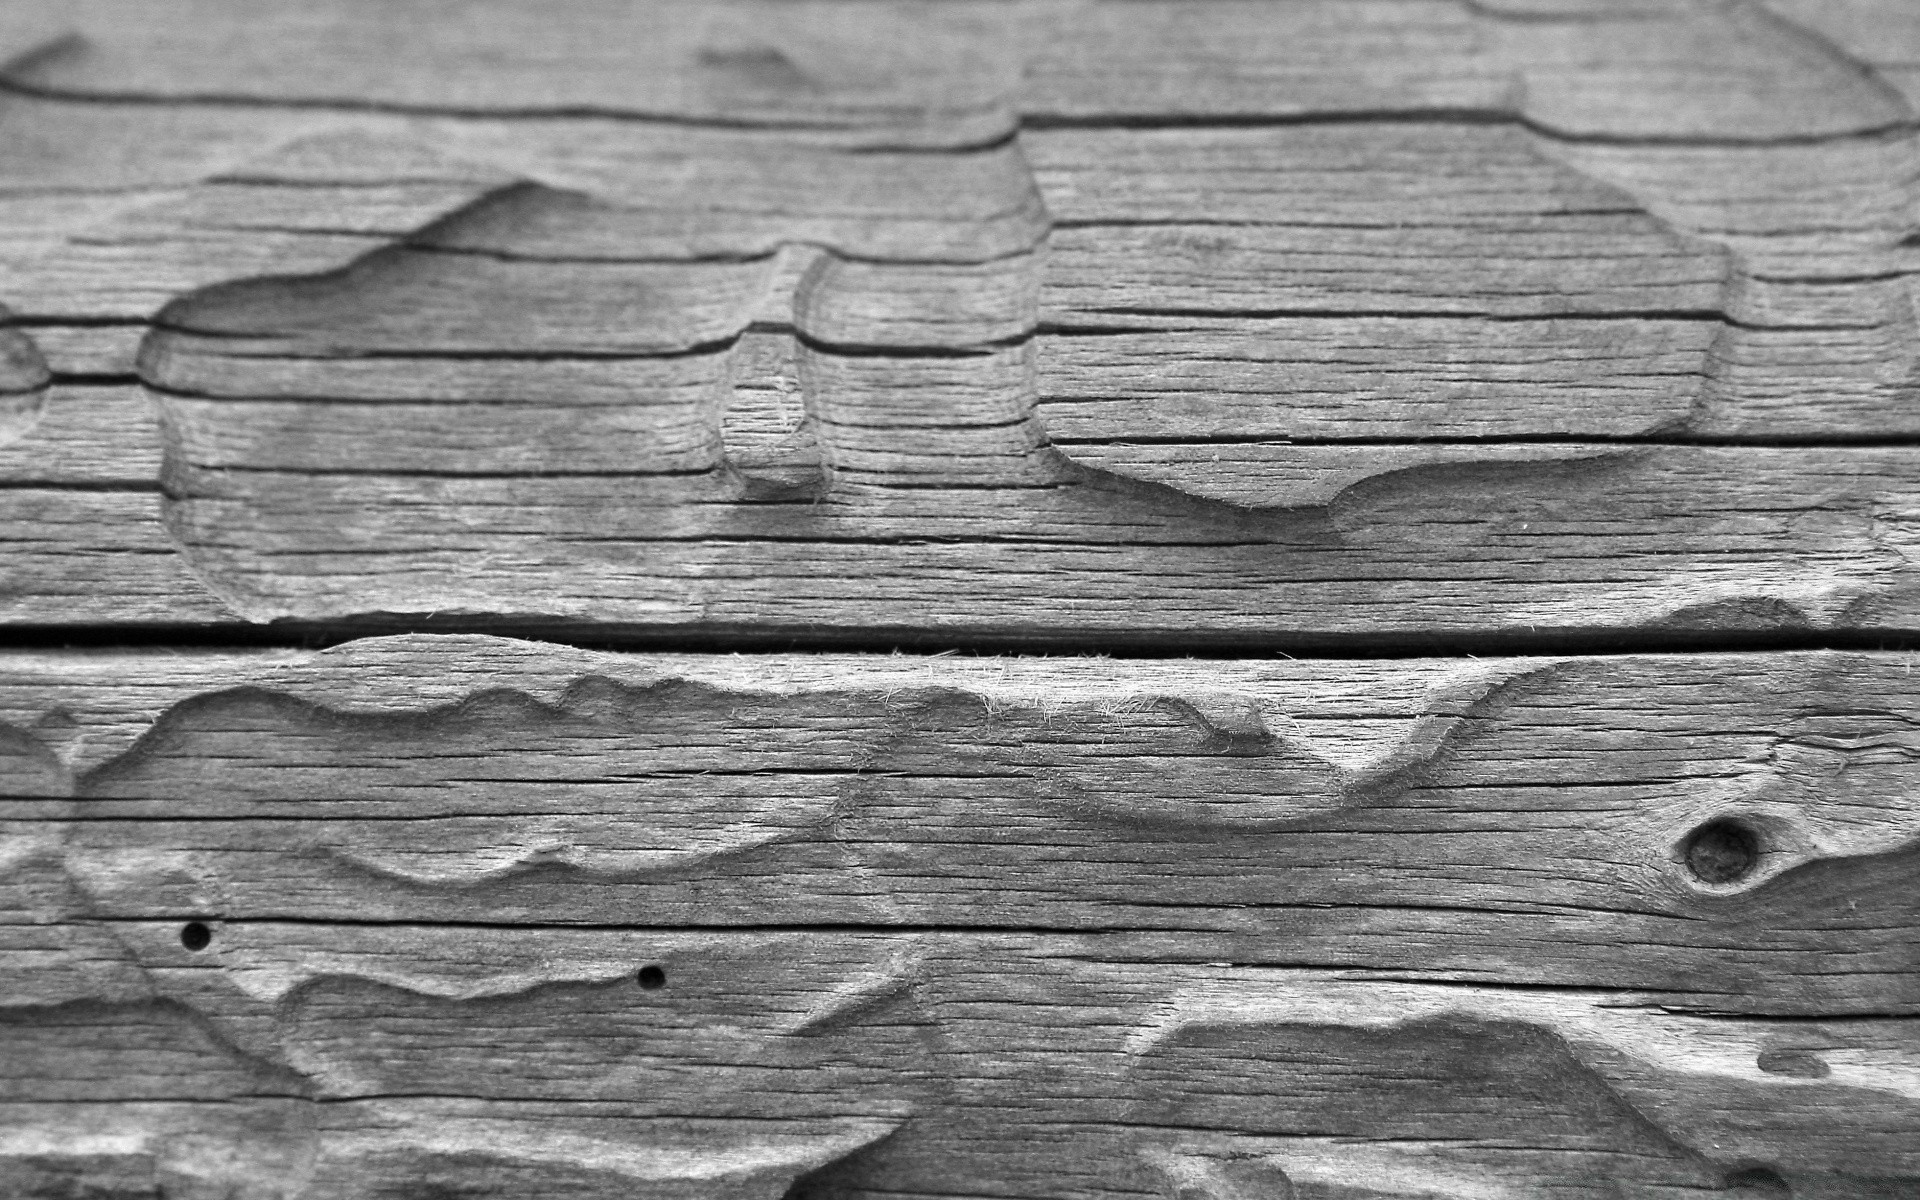 black and white fabric pattern texture desktop log rough surface wall floor old construction expression abstract design wood panel wooden retro board grain